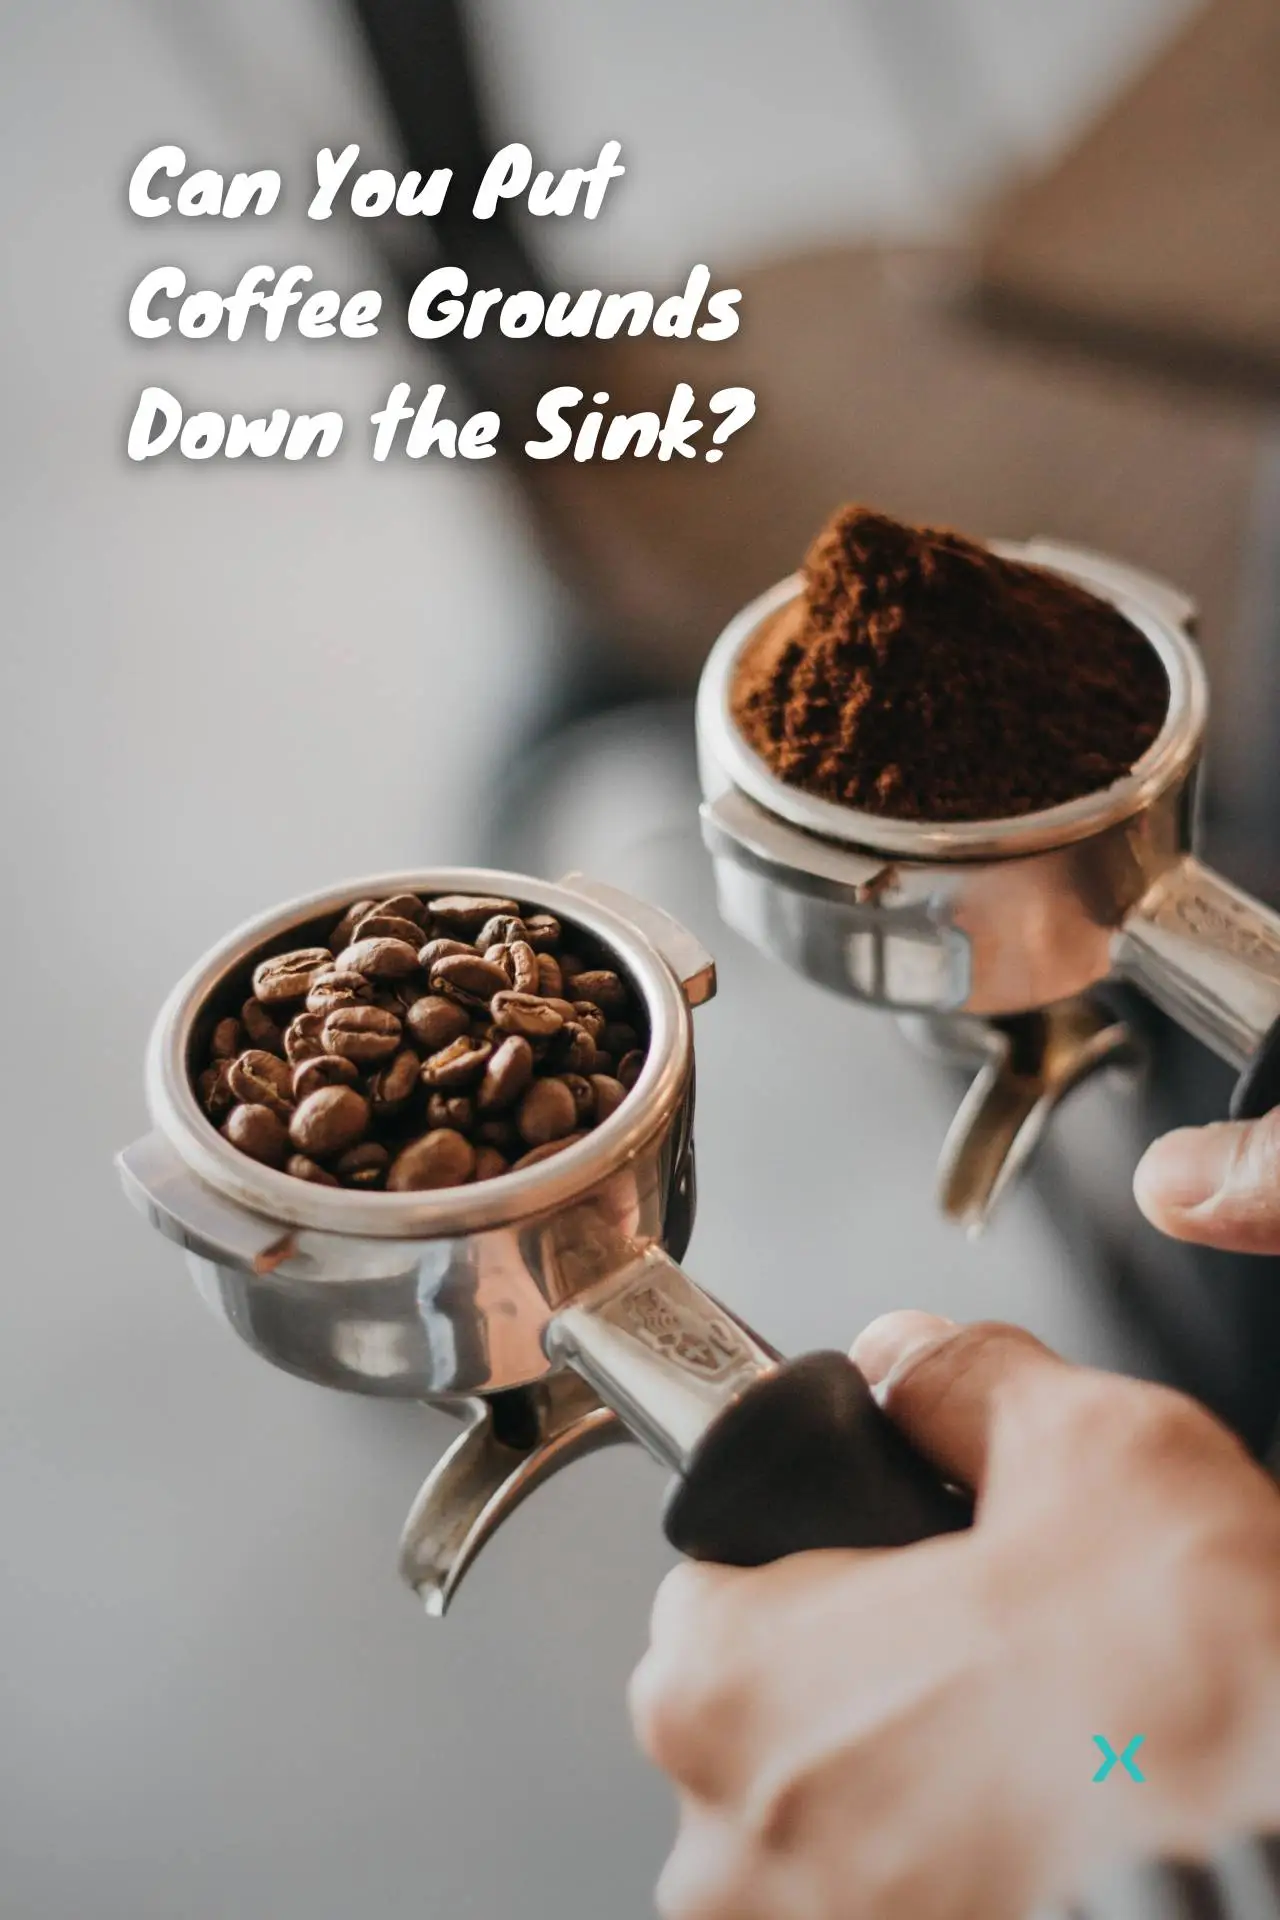 Can You Put Coffee Grounds Down the Sink